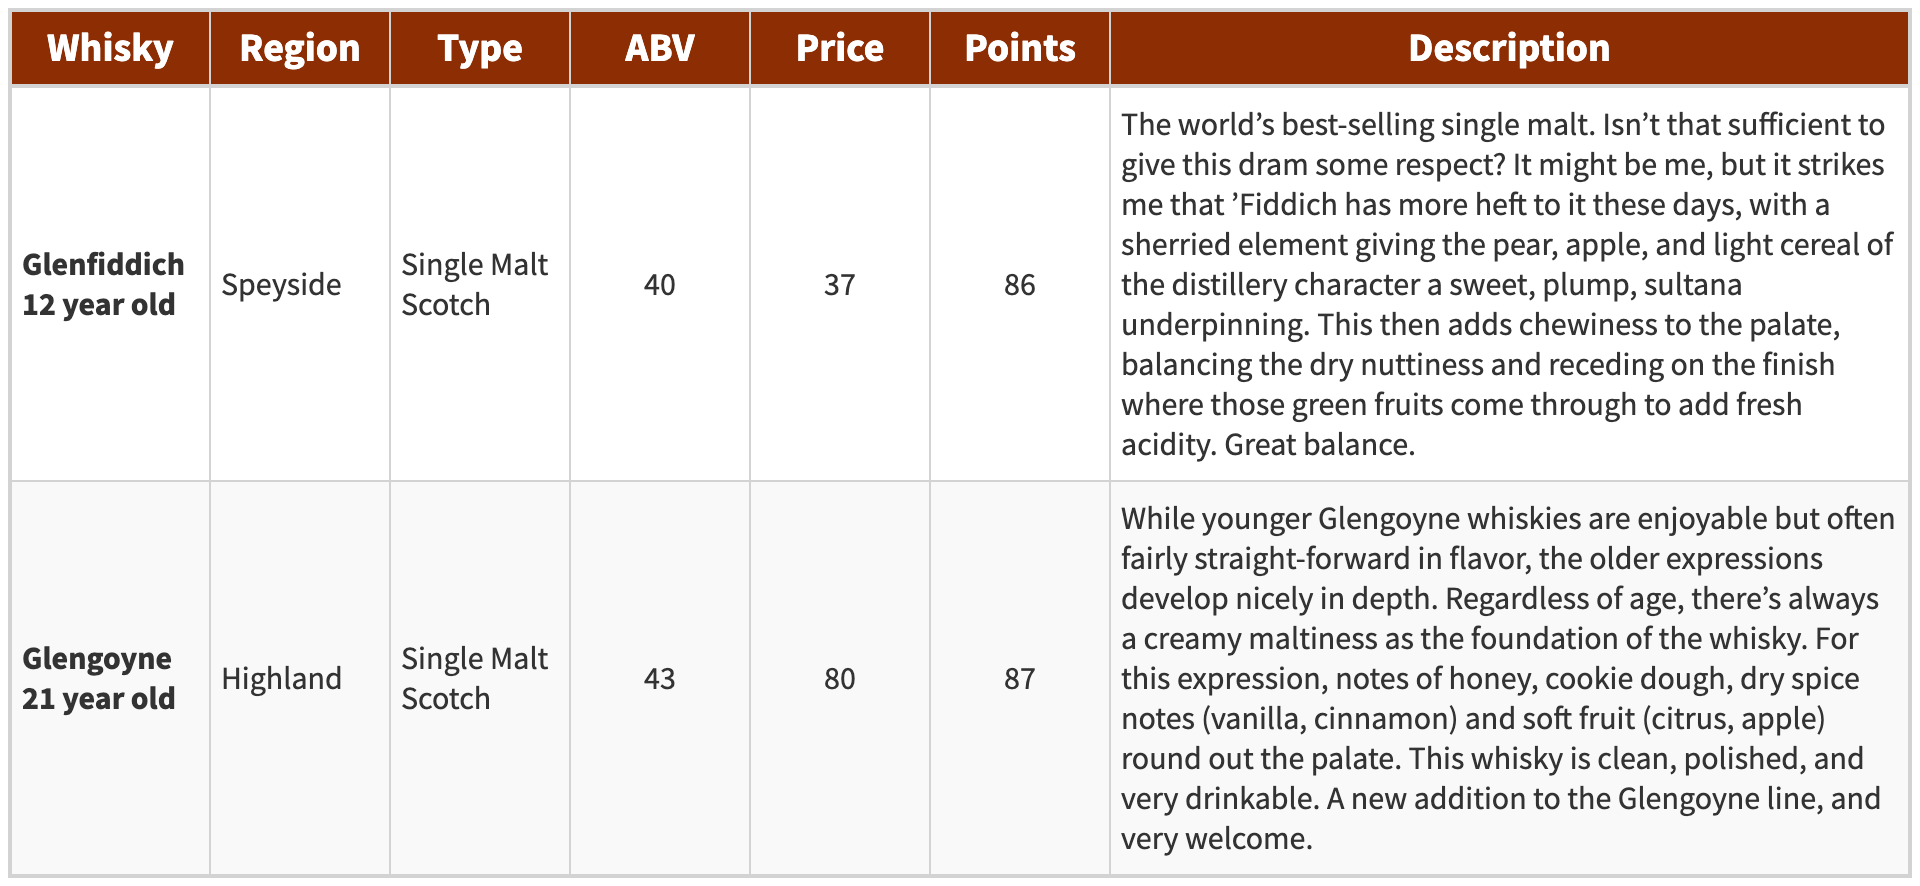 Table describing features of Glenfiddich 12 and Glengoyne 21.